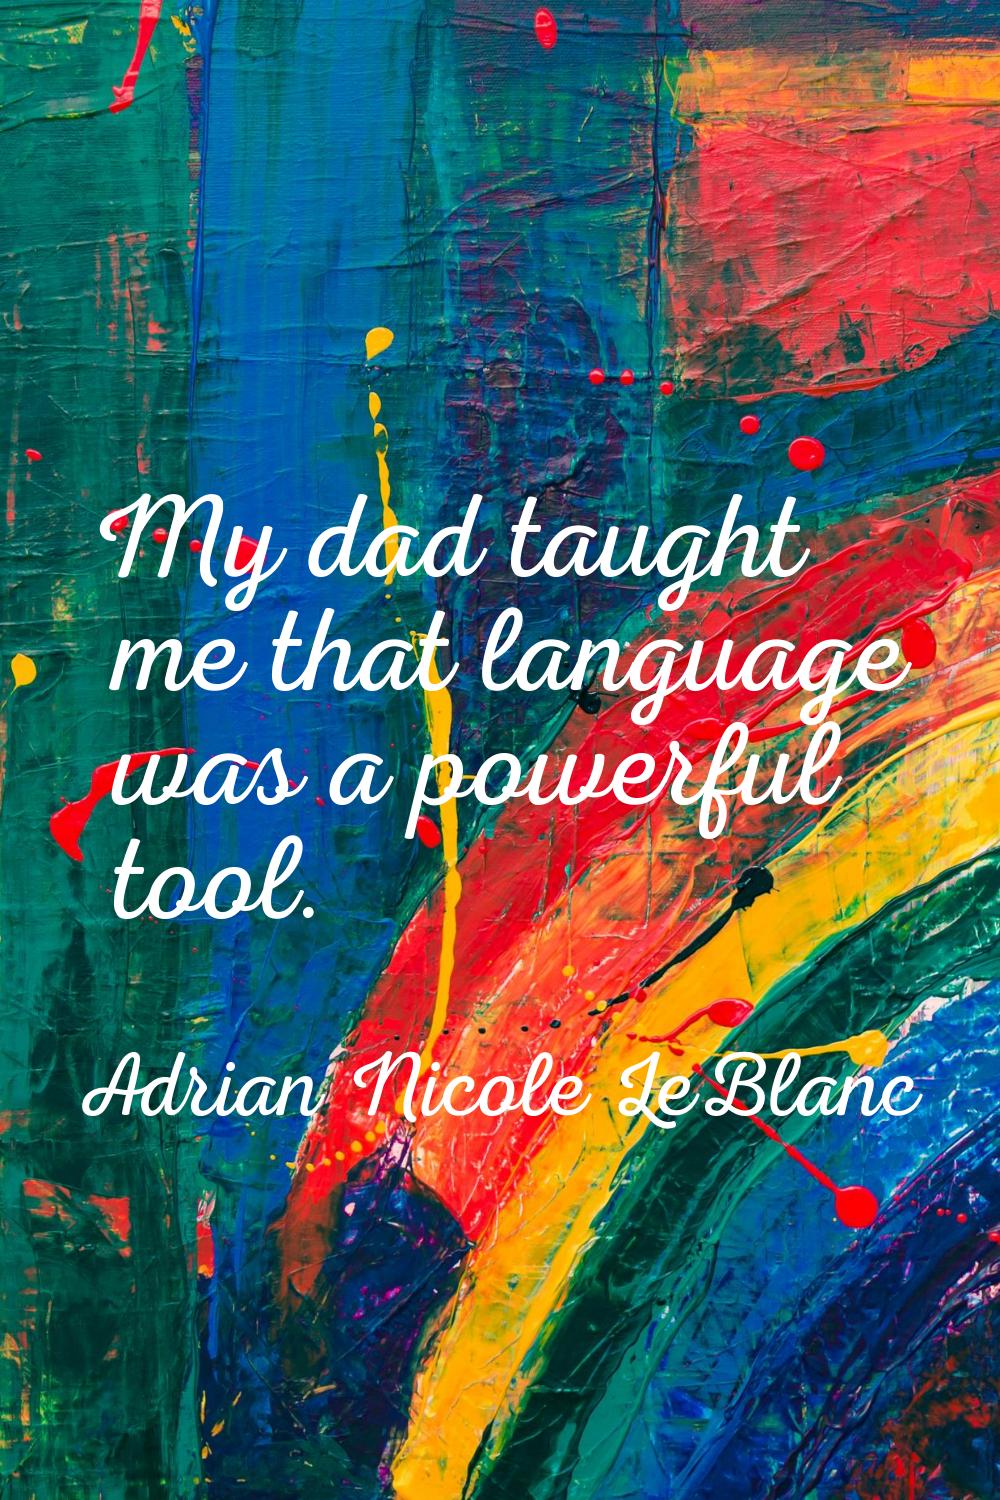 My dad taught me that language was a powerful tool.